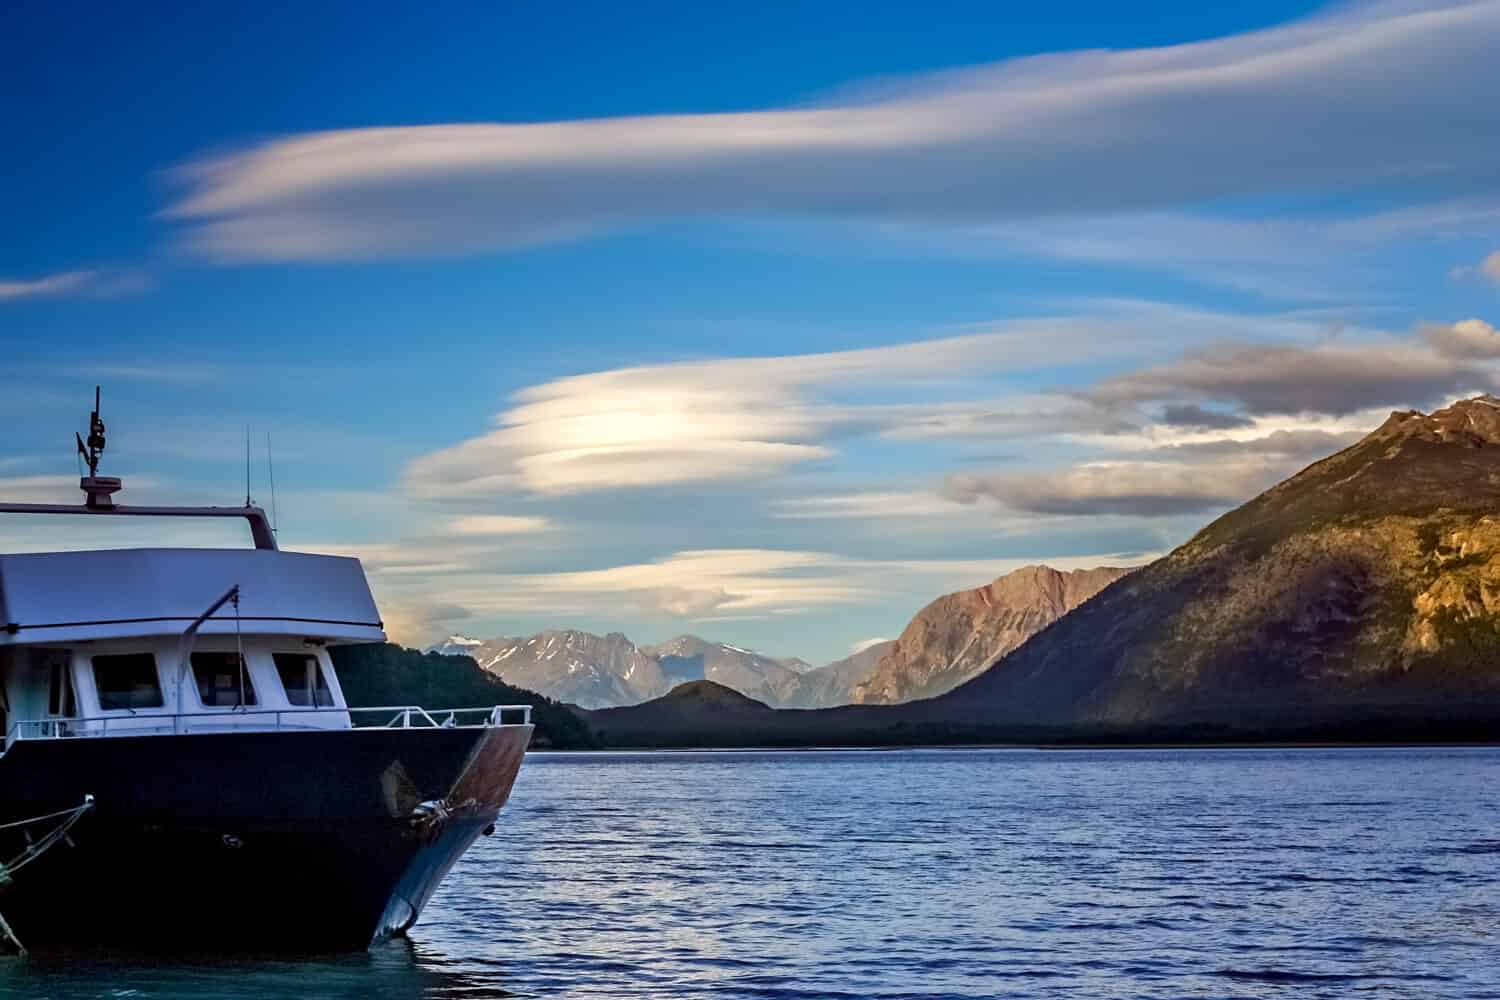 Boat transporting tourists across beautiful Lago O Higgins from  Chile to Argentina